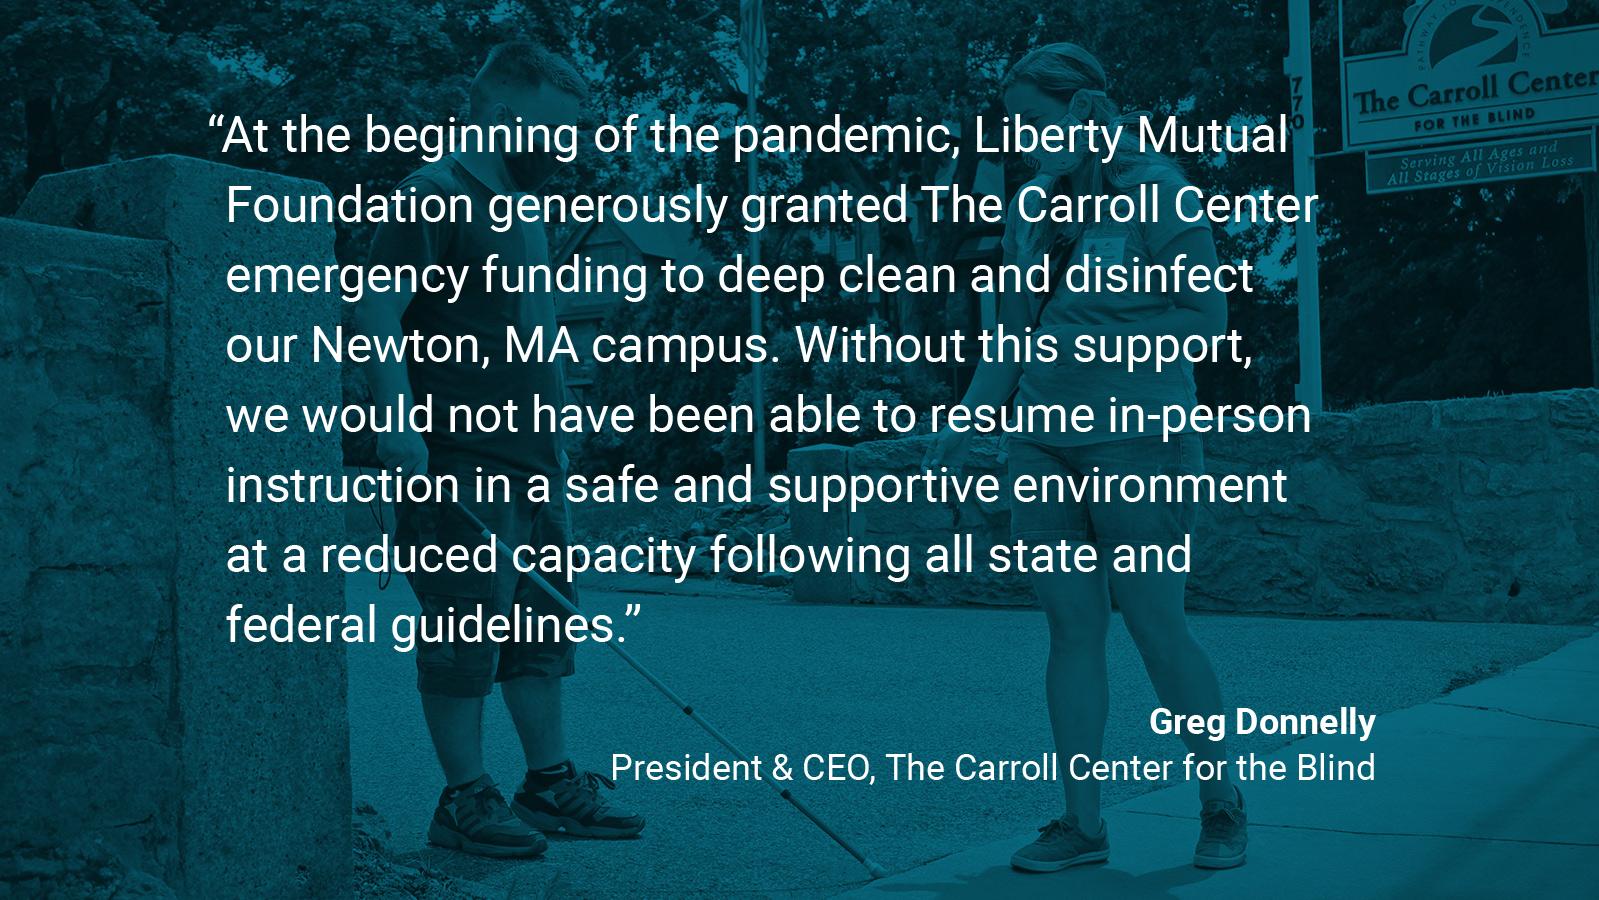 (slide 2 of 4) Quote by: Greg Donnelly, President and CEO at The Carroll Center for the Blind: "At the beginning of the pandemic, Liberty Mutual Foundation generously granted The Carroll Center emergency funding to deep clean and disinfect our Newton, MA campus. Without this support, we would not have been able to resume in-person instruction in a safe and supportive environment at a reduced capacity following all state and federal guidelines.. 